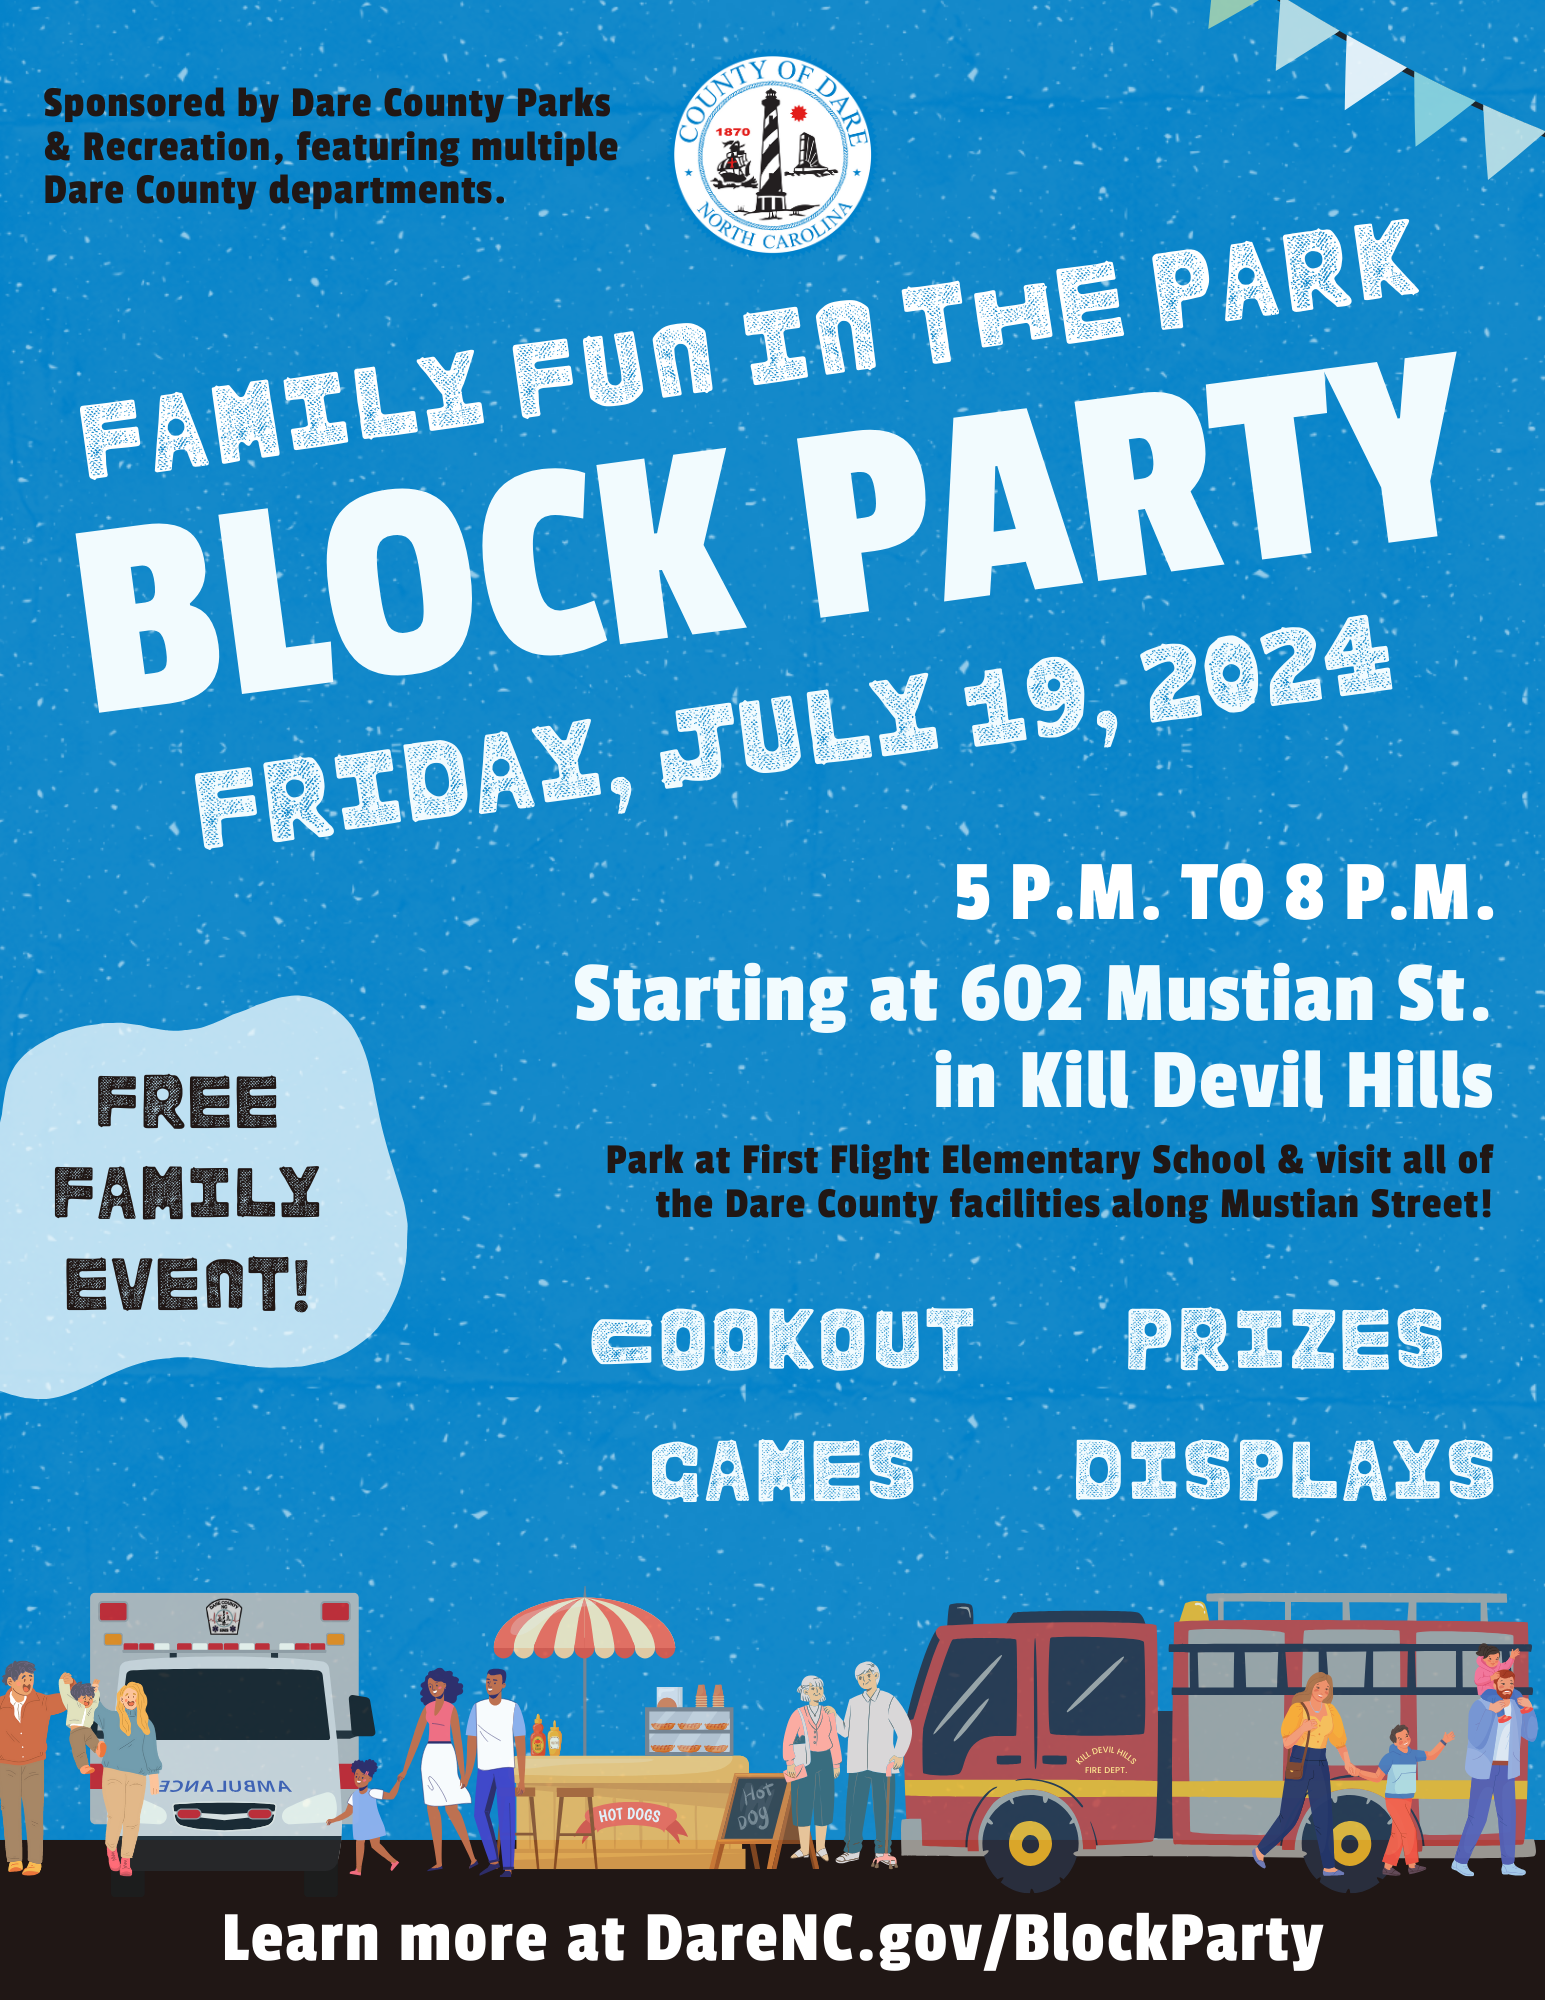 Flyer reads: Family Fun in the Park Block Party Friday, July 19, 2024 | 5 p.m. to 8 p.m. Starting at 602 Mustian St. in Kill Devil Hills